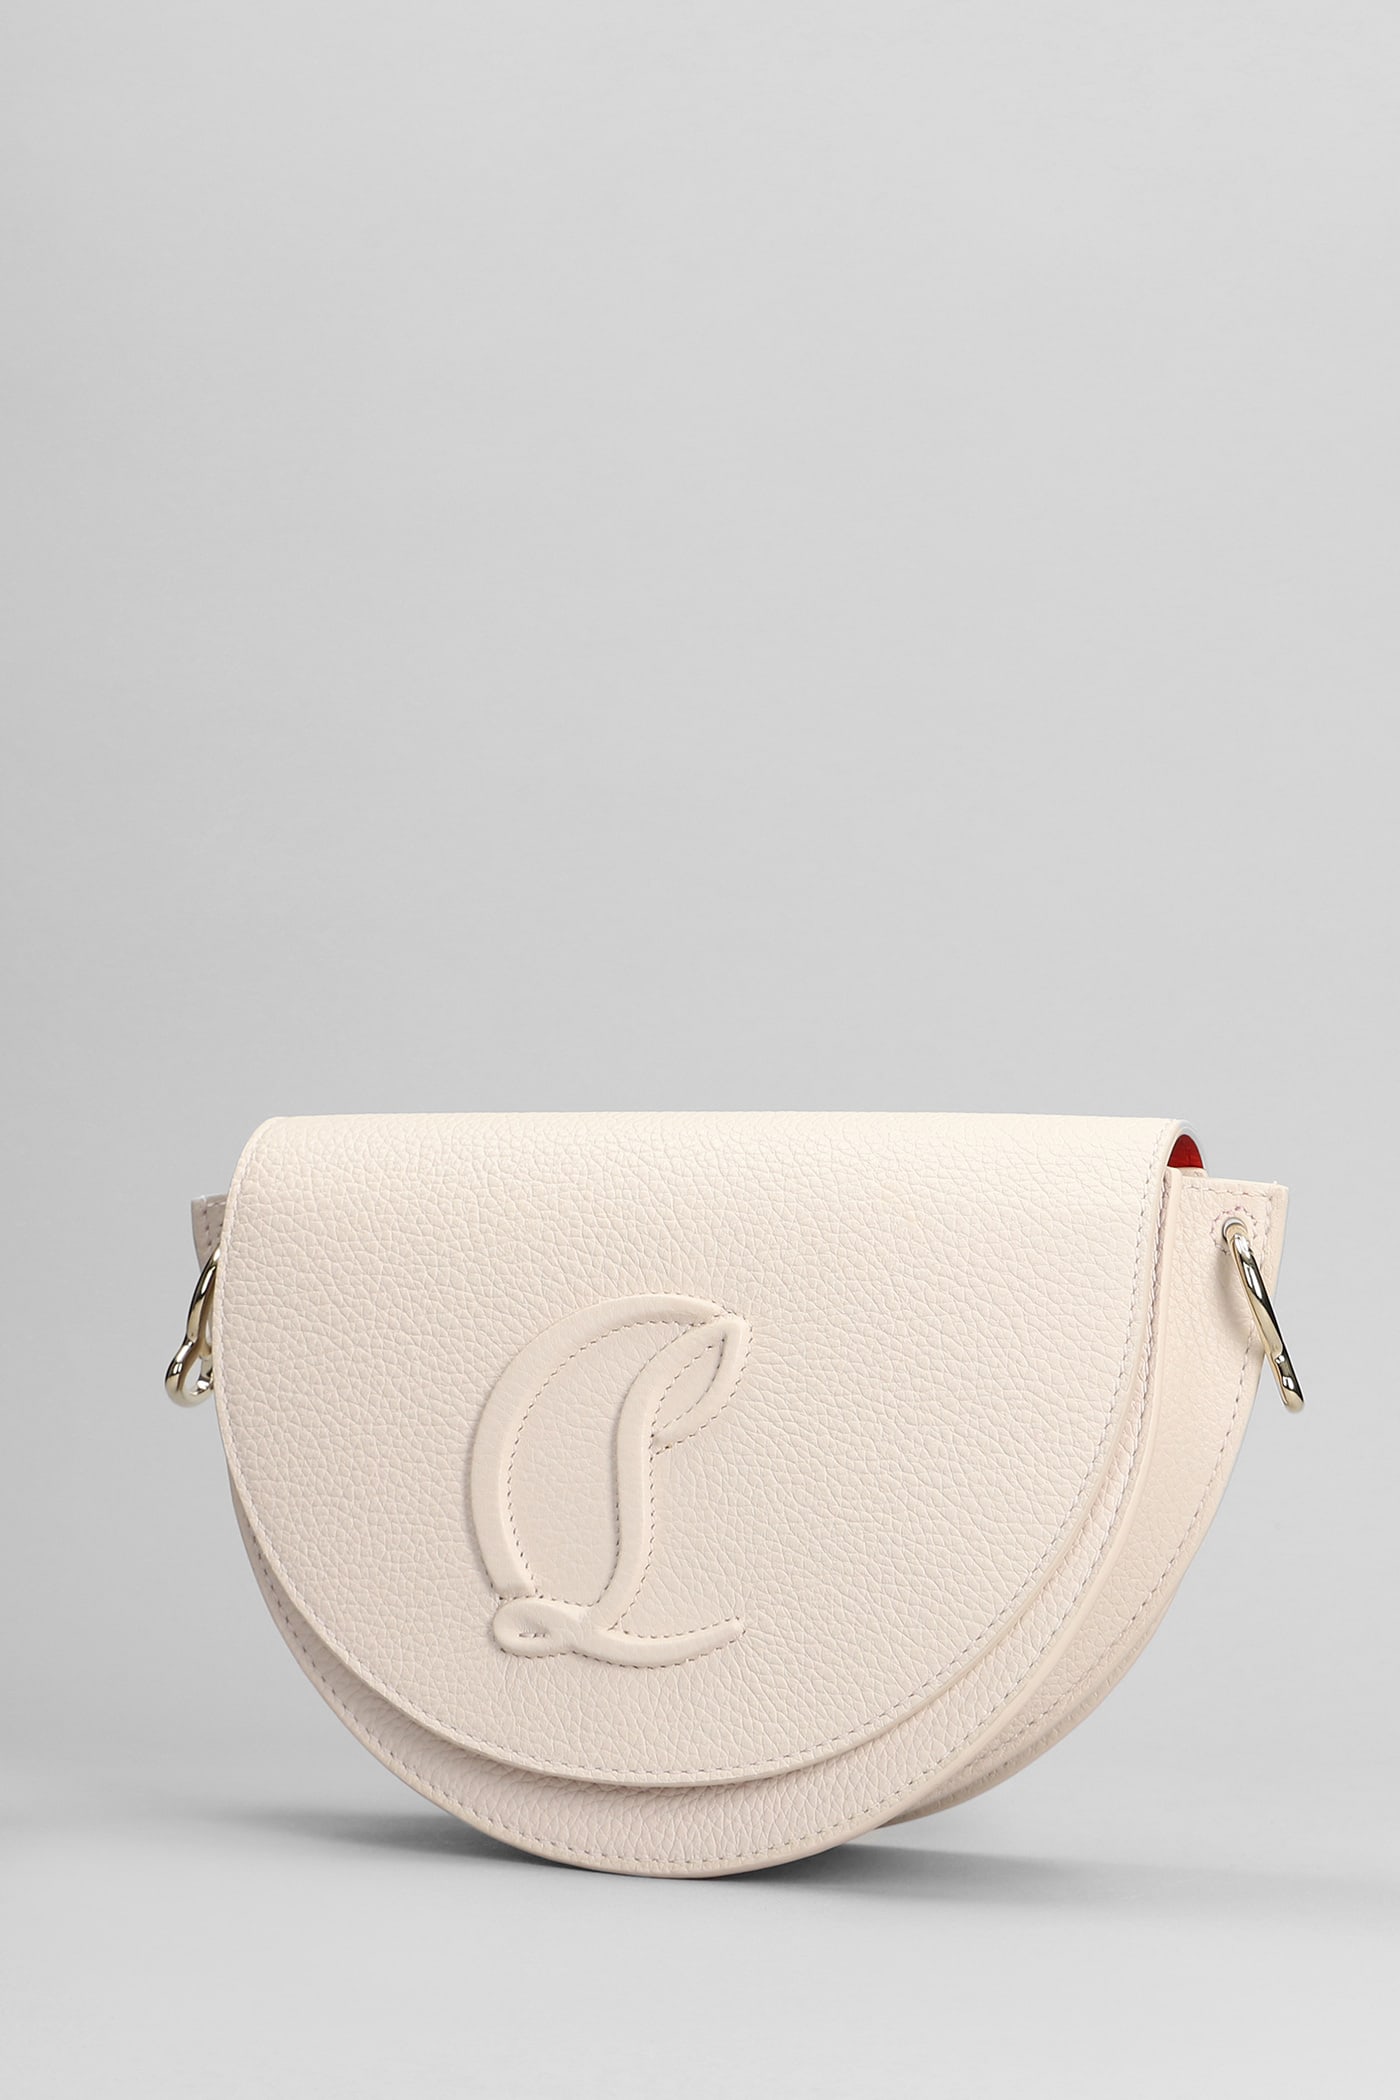 Shop Christian Louboutin By My Side Shoulder Bag In Rose-pink Leather